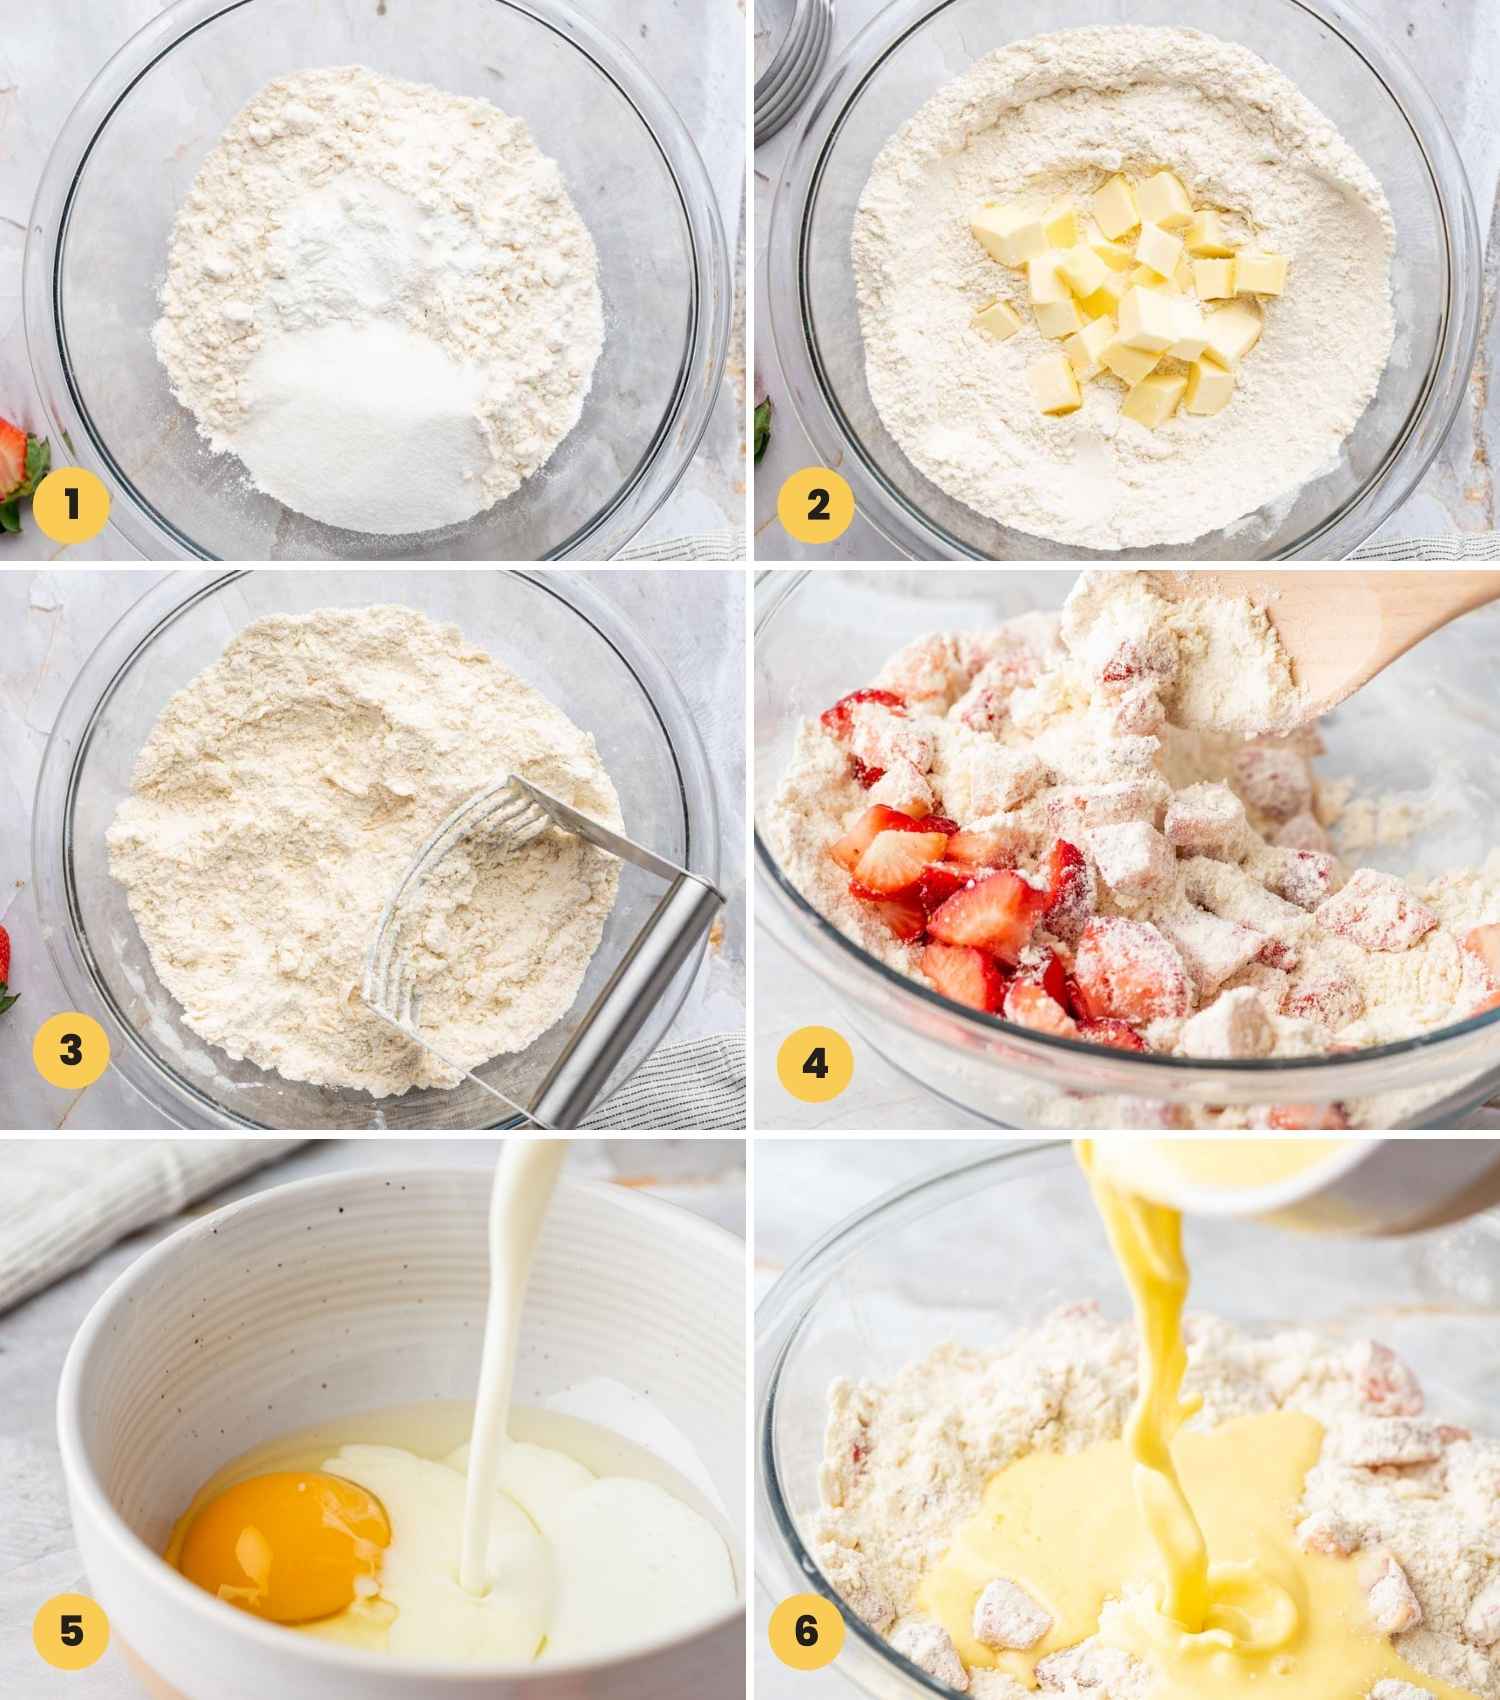 A collage with 6 images showing how to make strawberry scones from scratch